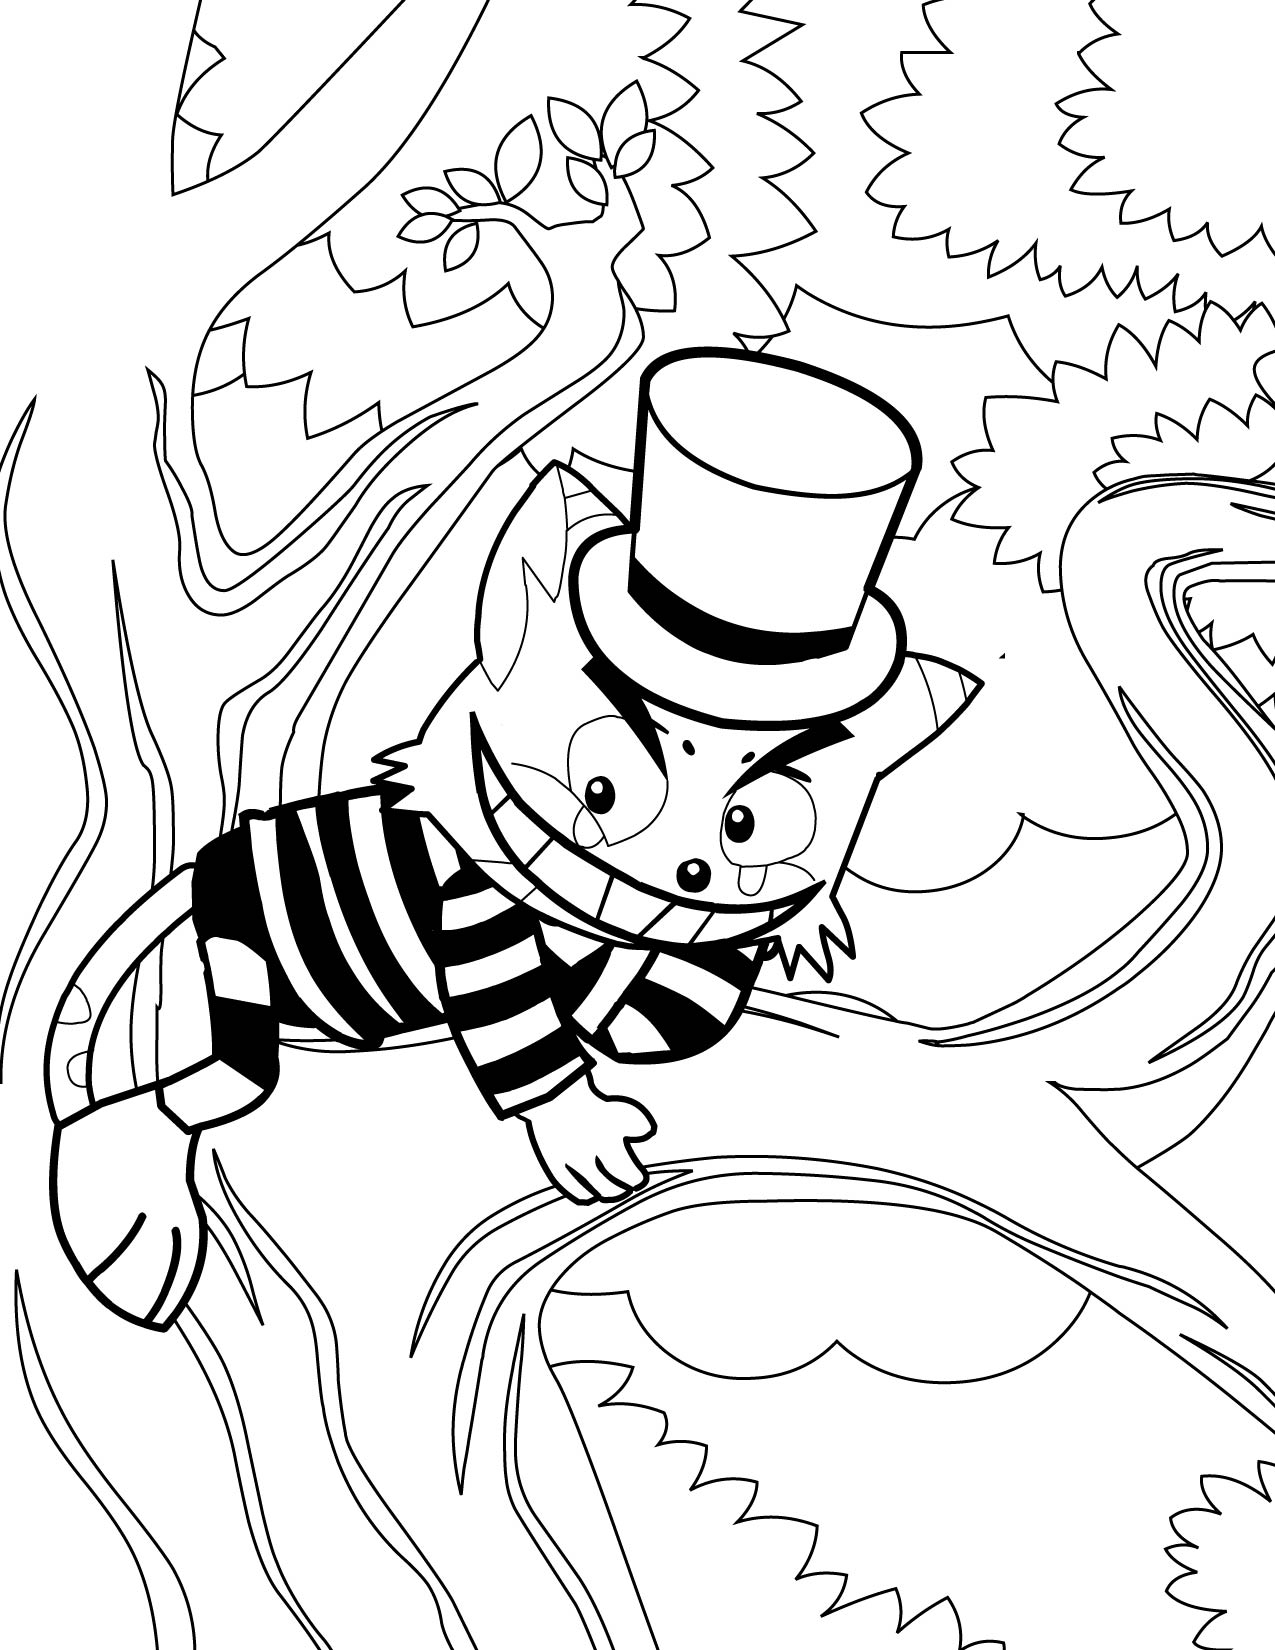 Alice In Wonderland Cat Coloring Pages at GetColorings.com | Free